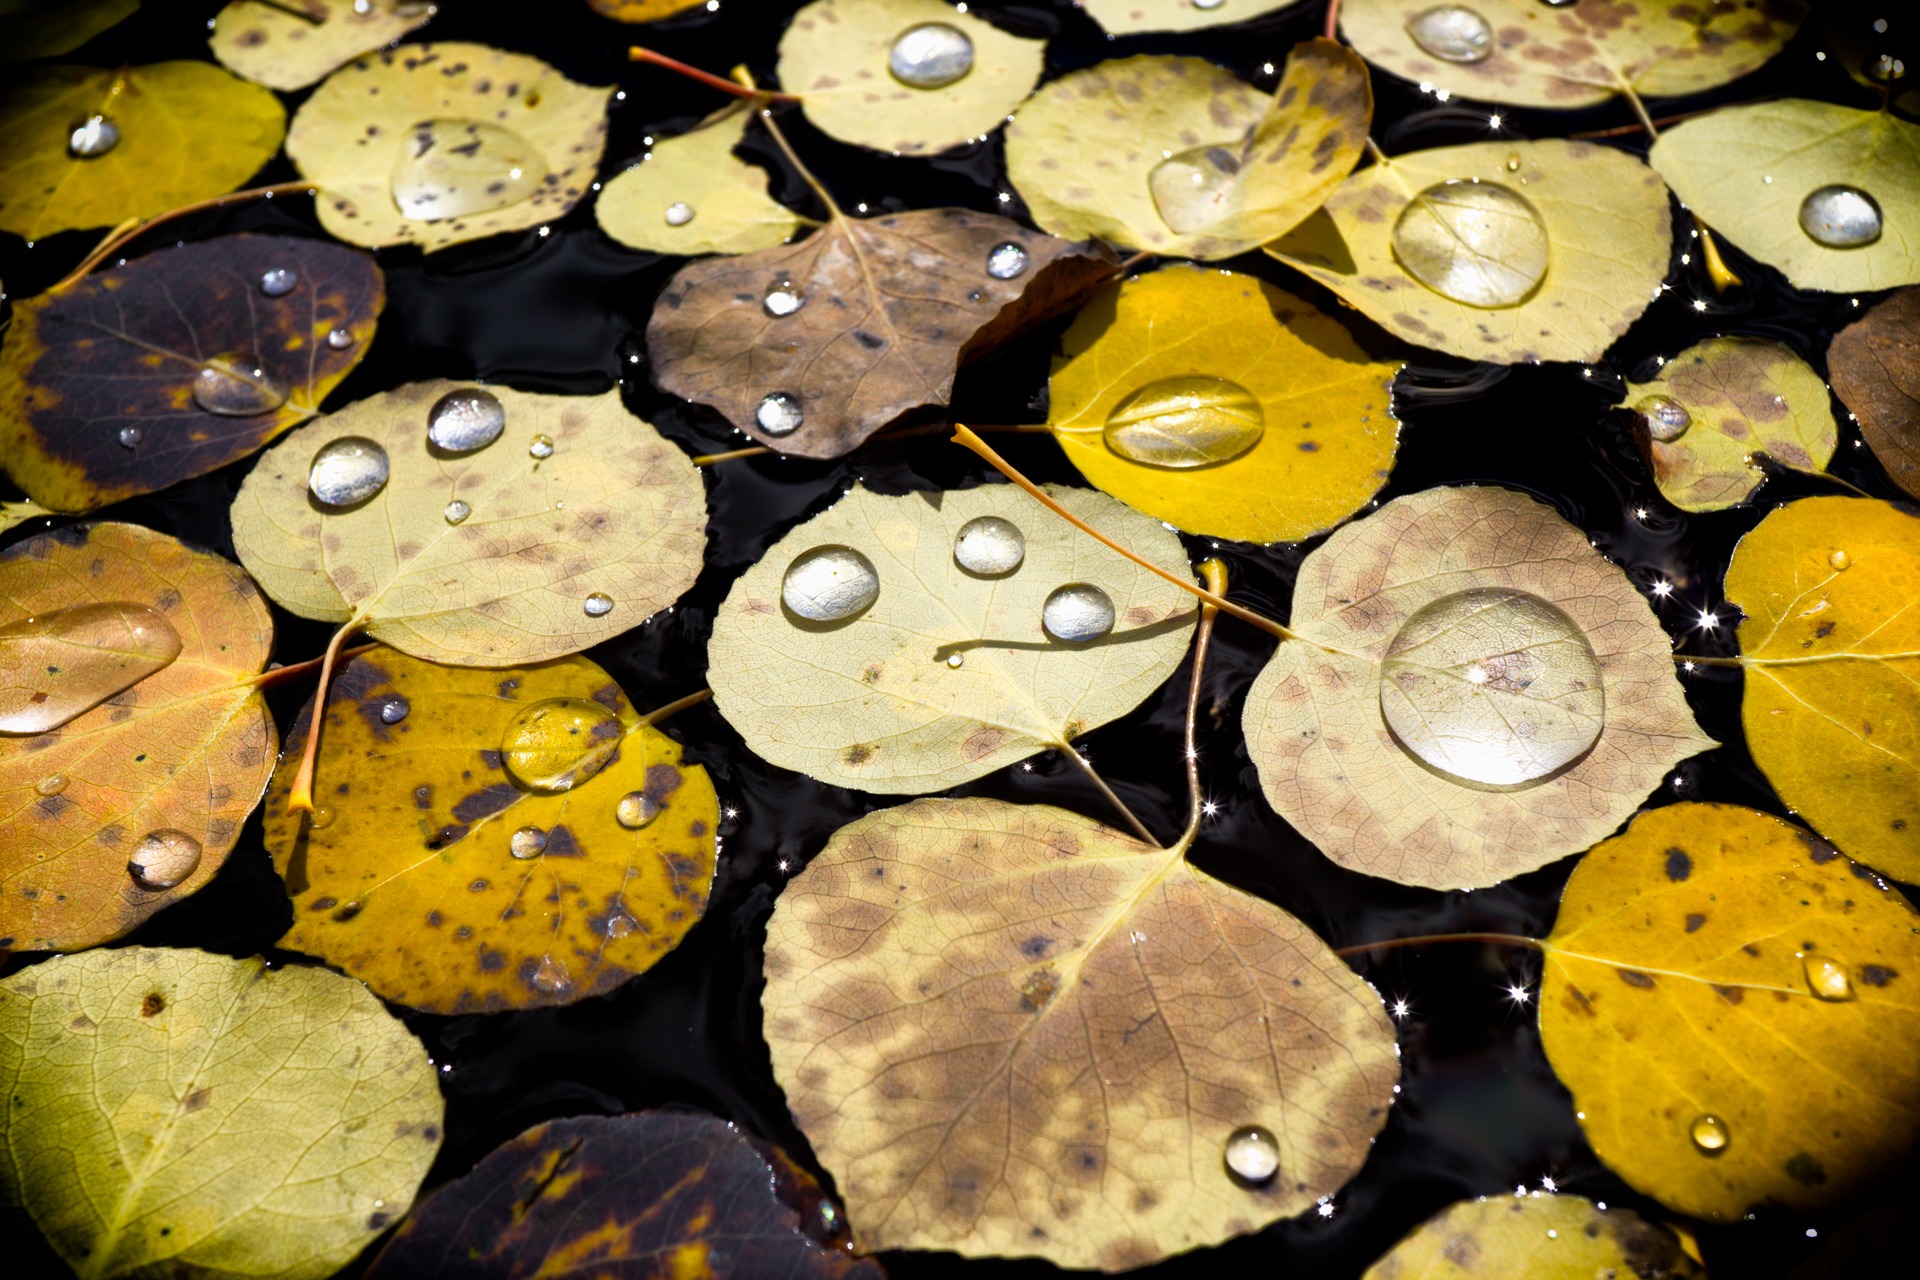 C10_2 Morgan Wolfers Aspen Leaf Dew Nature Photographer of the Year Contest 2017